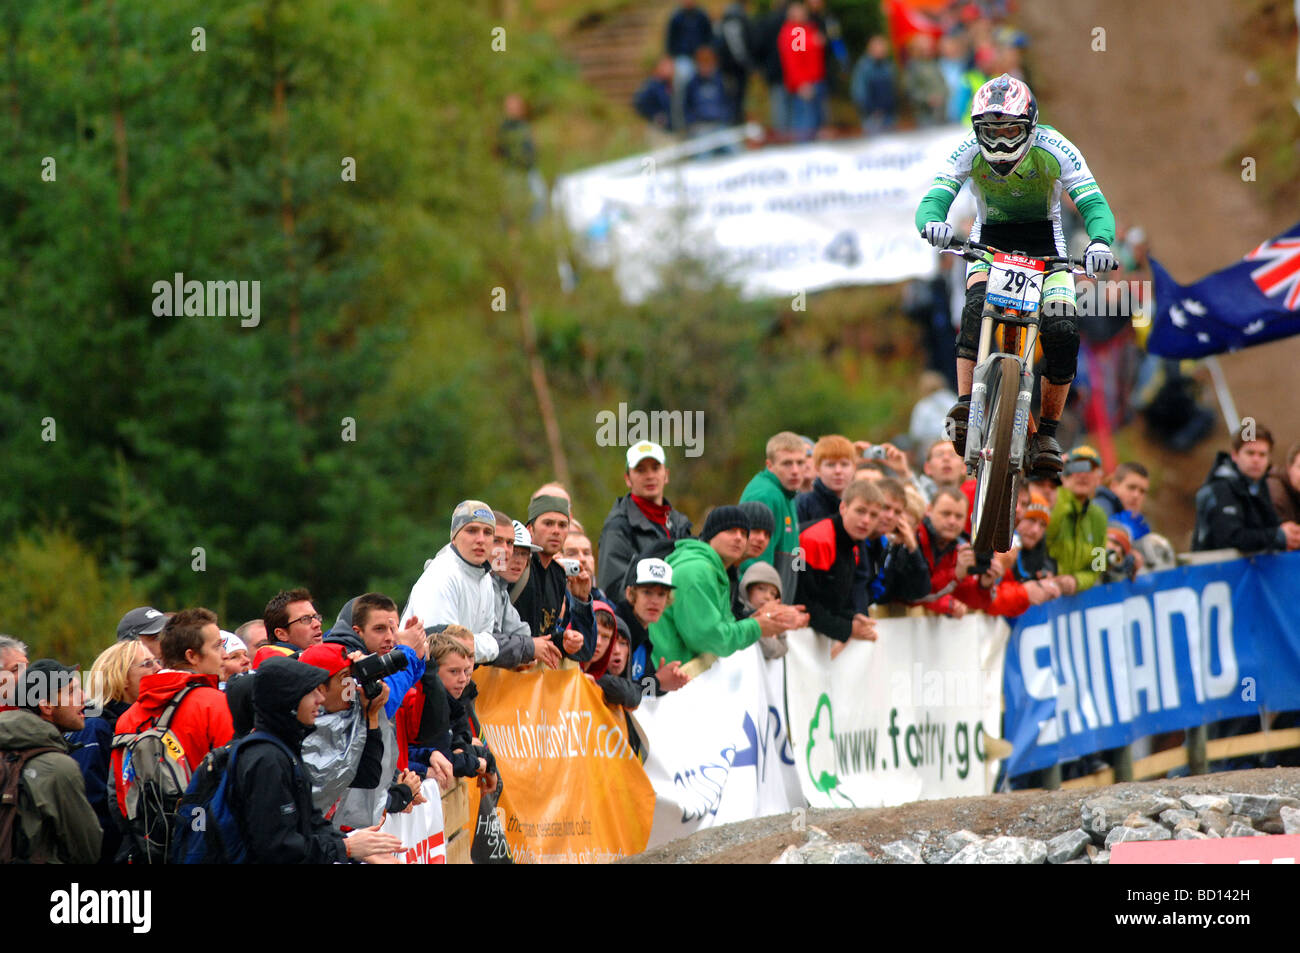 A downhill mountain biker jumps in to the finish arena at the Mountain Bike World Championships in Fort William, Scotland. Stock Photo